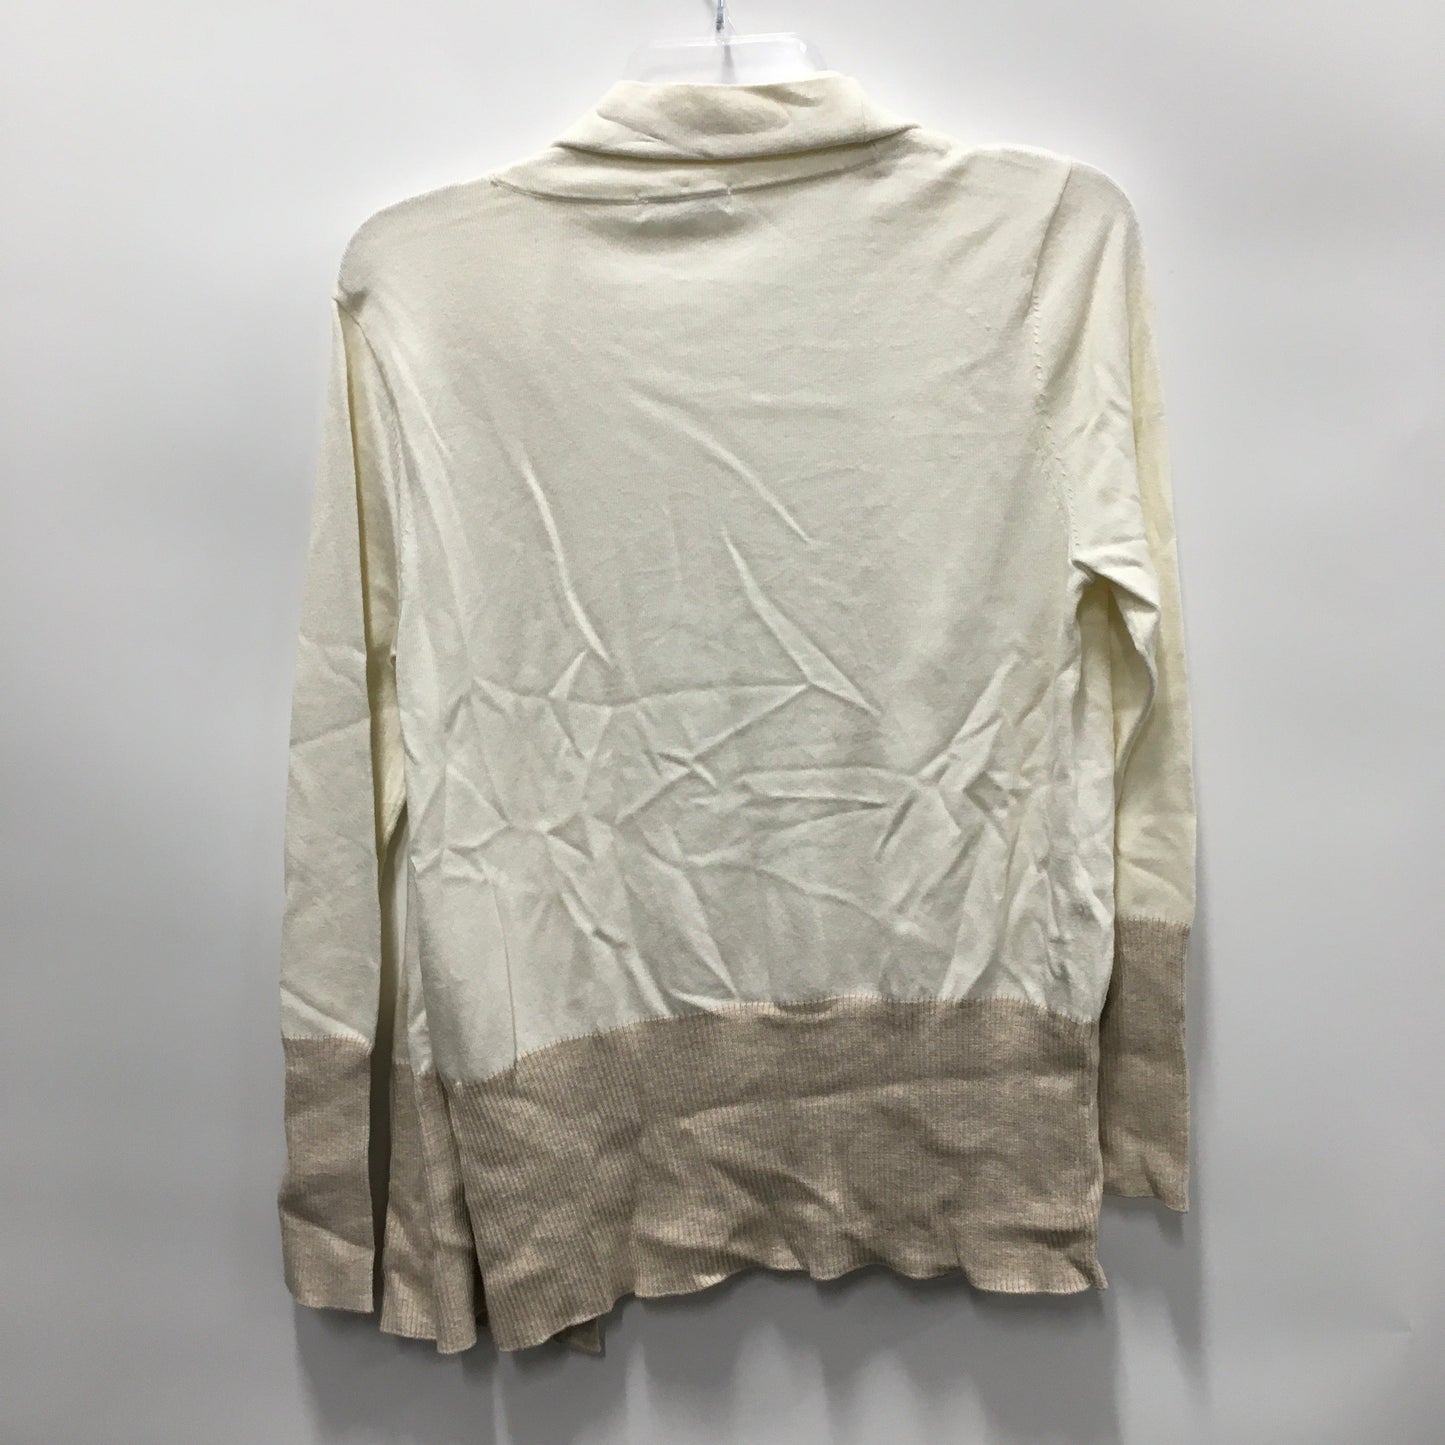 Cream Cardigan New York And Co, Size L